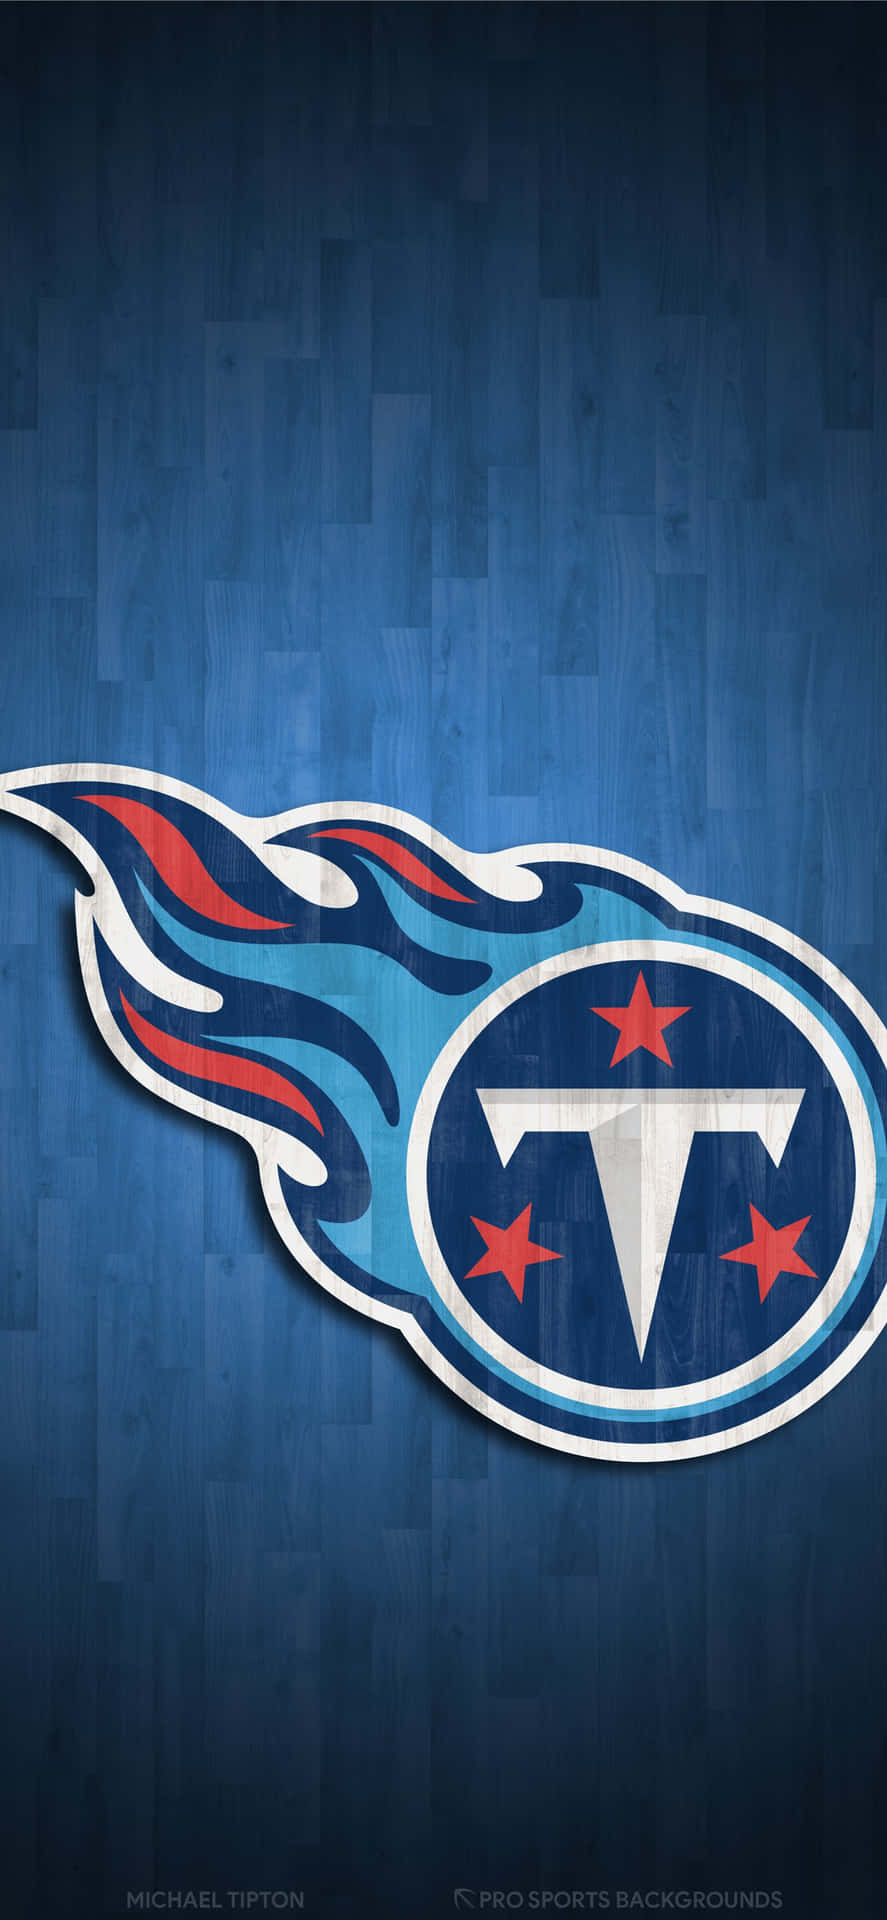 Get Ready for the Game with the new Tennessee Titans iPhone Wallpaper